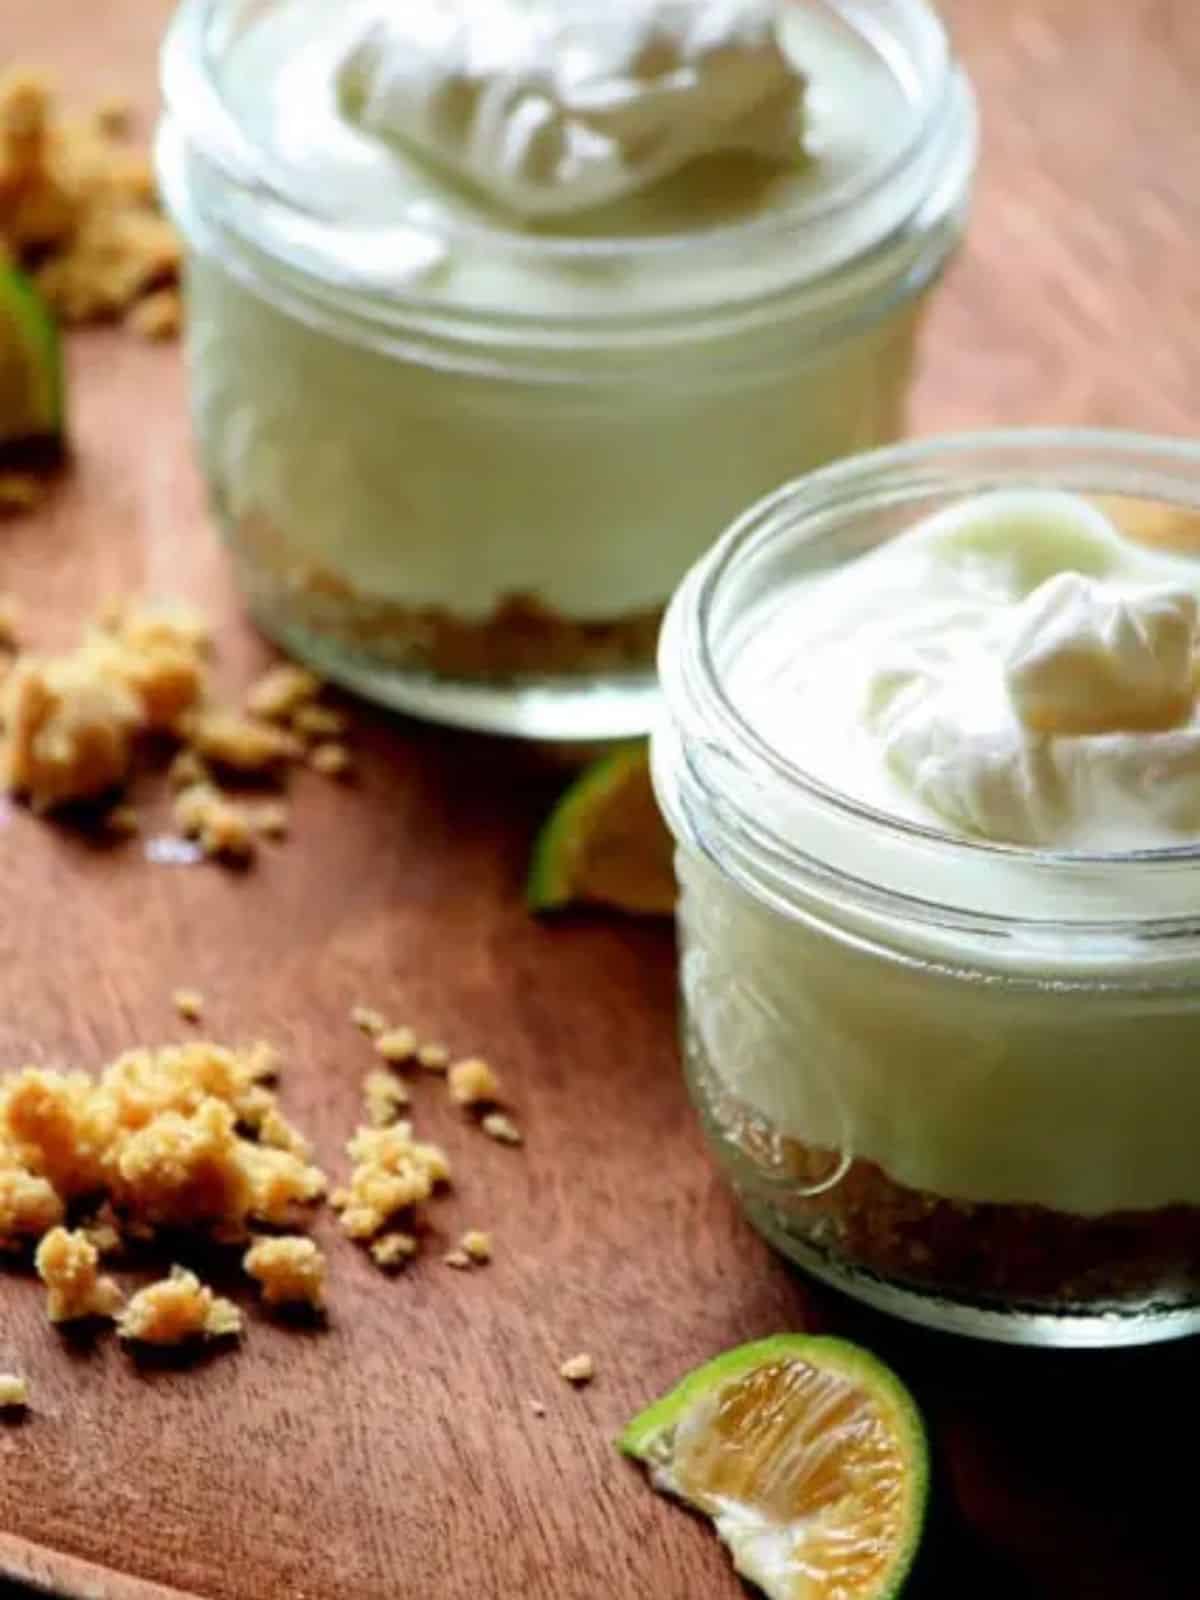 Mini Key Lime Pie in a glass cup.